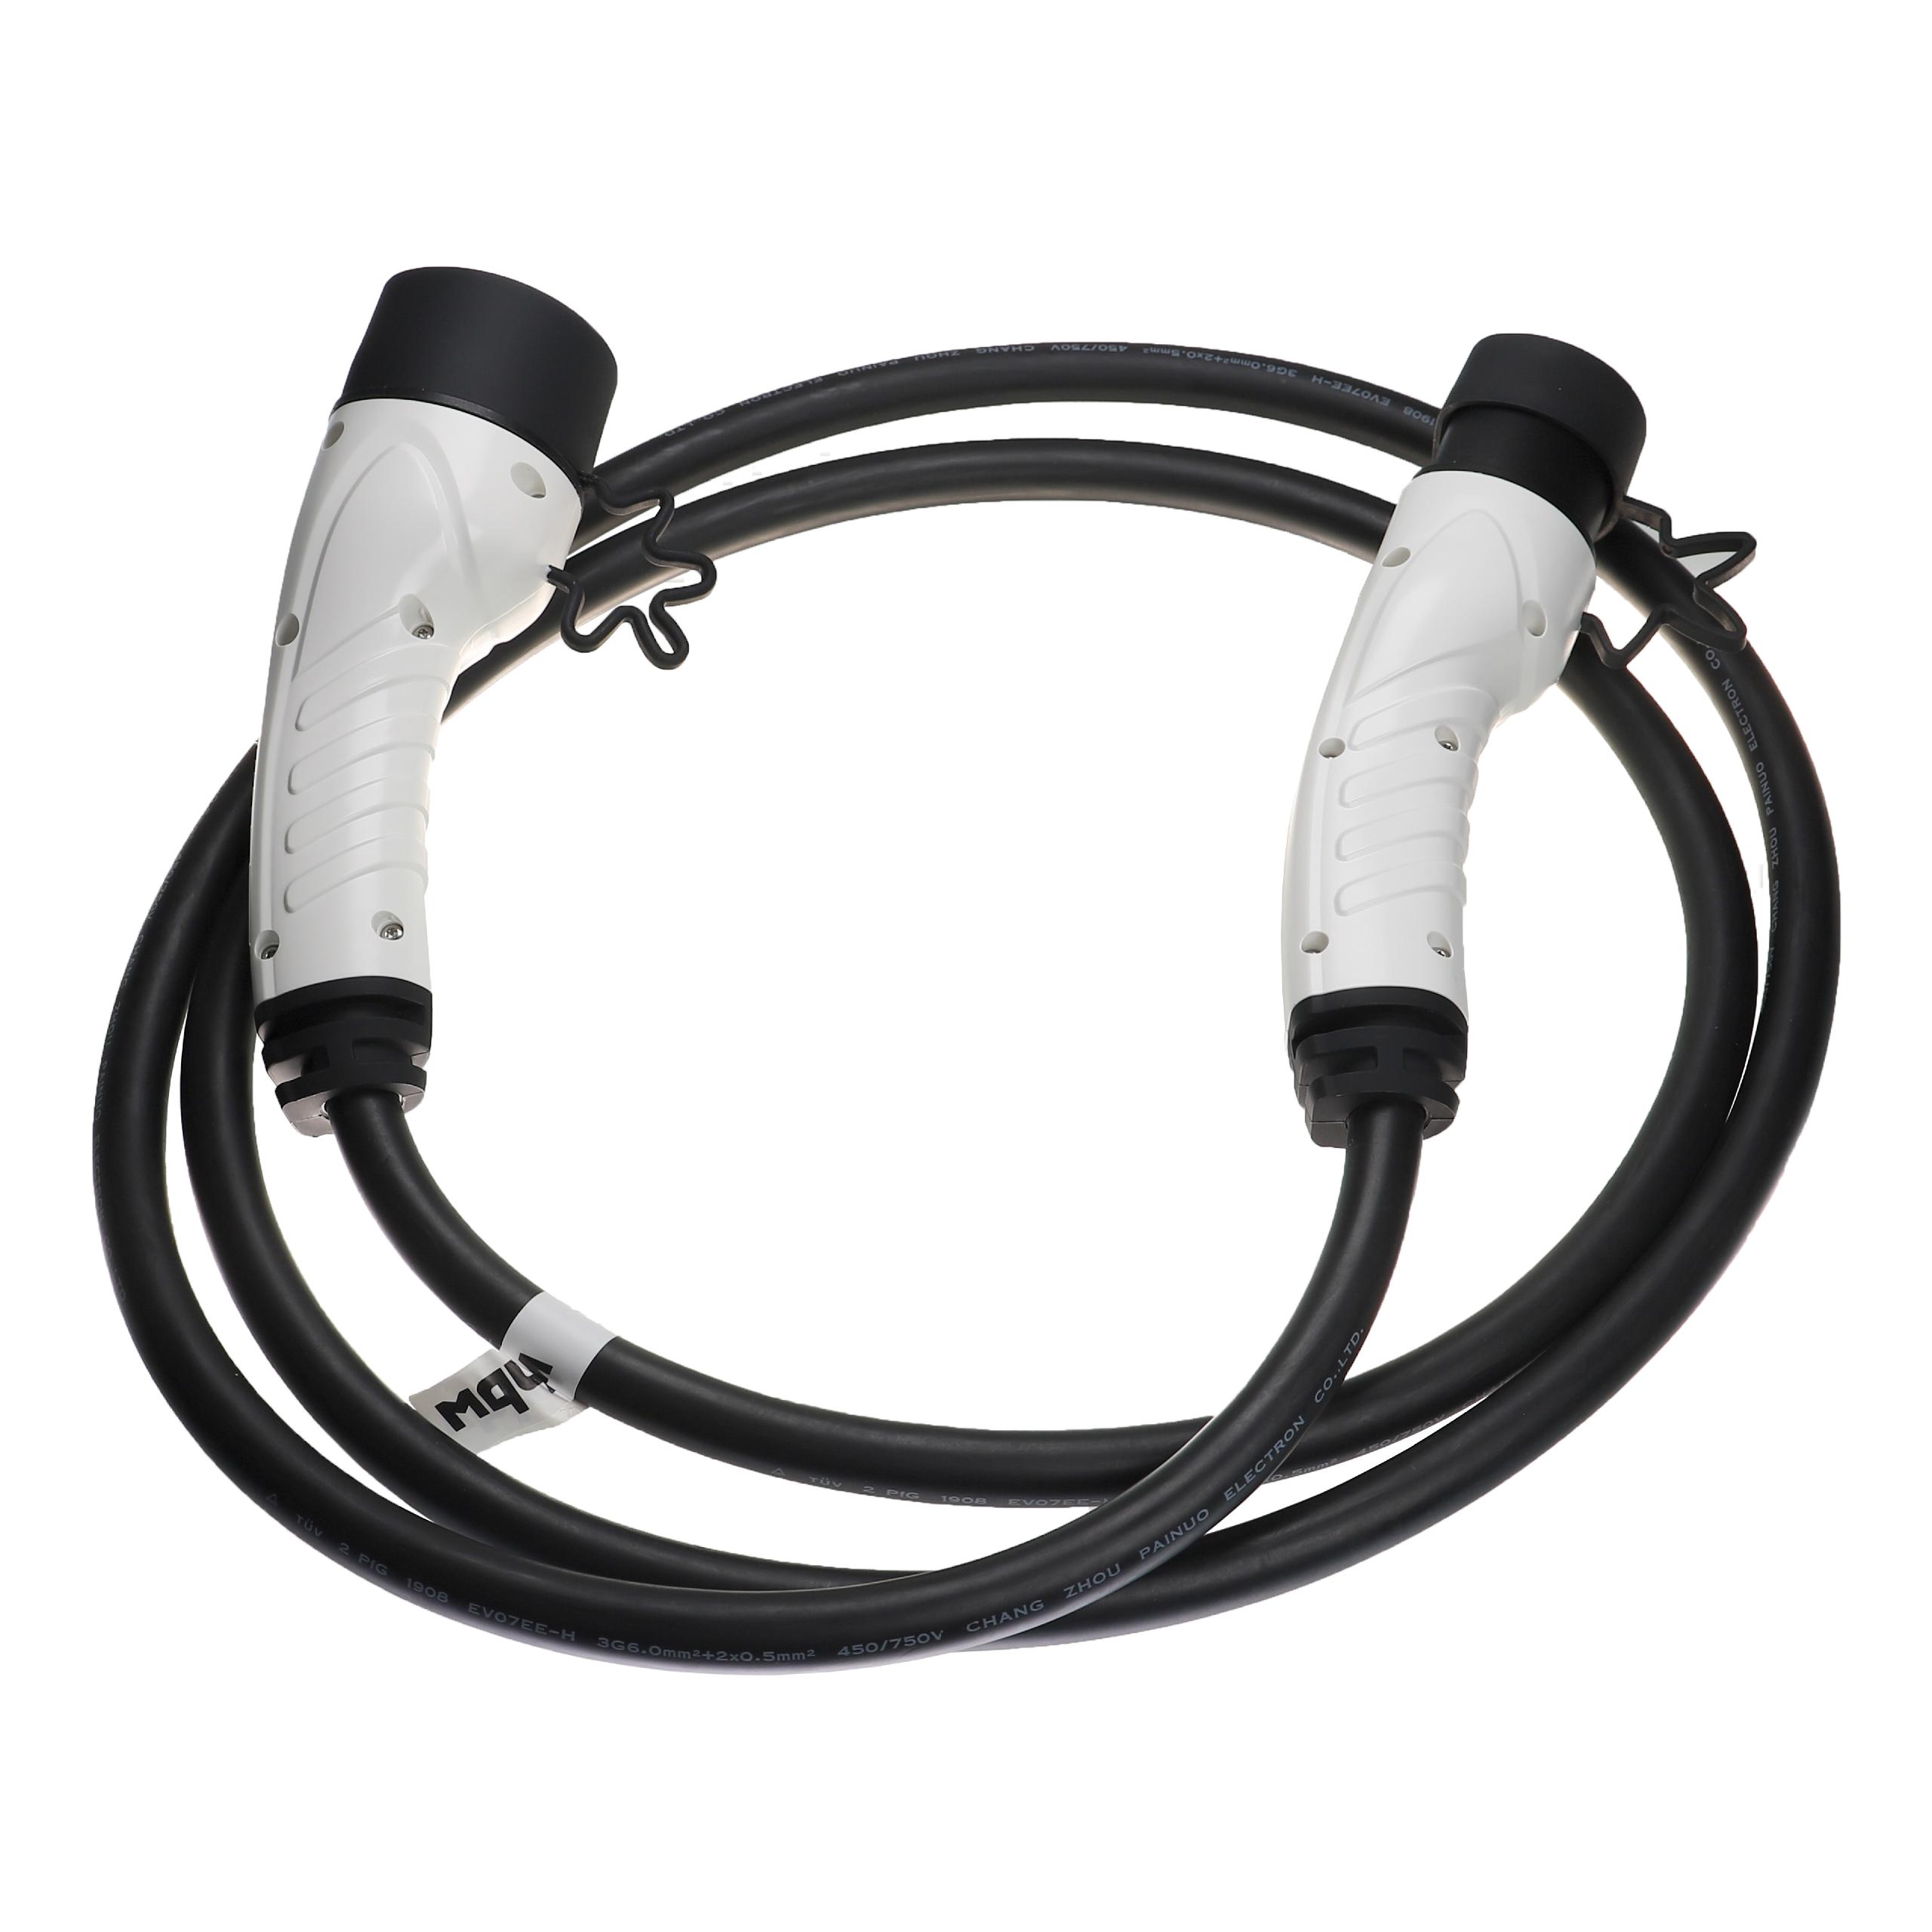 Charging Cable for Electric Car, Plug-In Hybrid - Type 2 to Type 2 Cable, Single-Phase, 32 A, 7 kW, 3 m